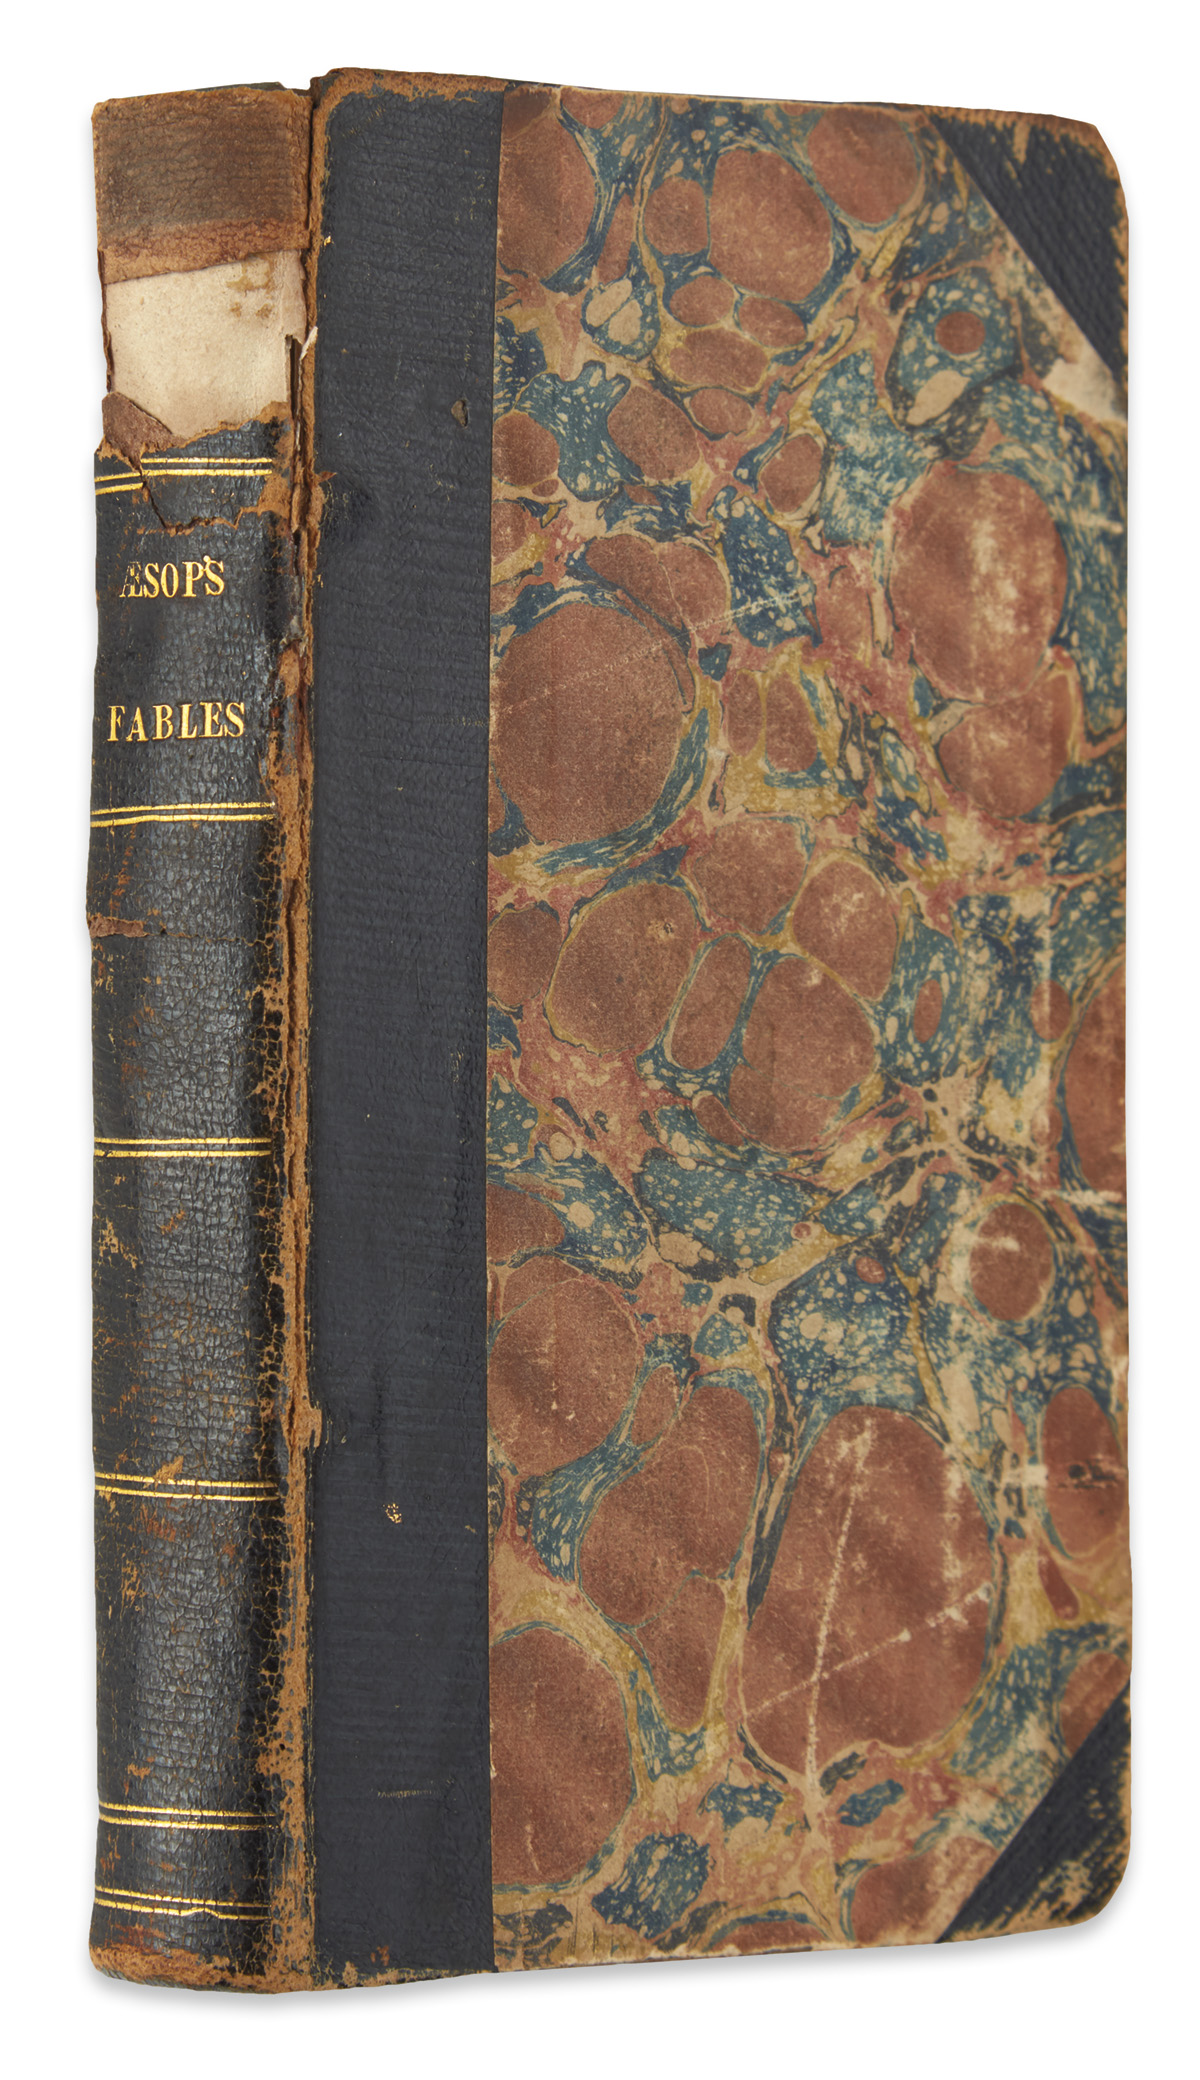 AESOP. Aesop’s Fables. With Instructive Morals and Reflections . . . design’d to promote Religion, Morality, [etc.].  1753